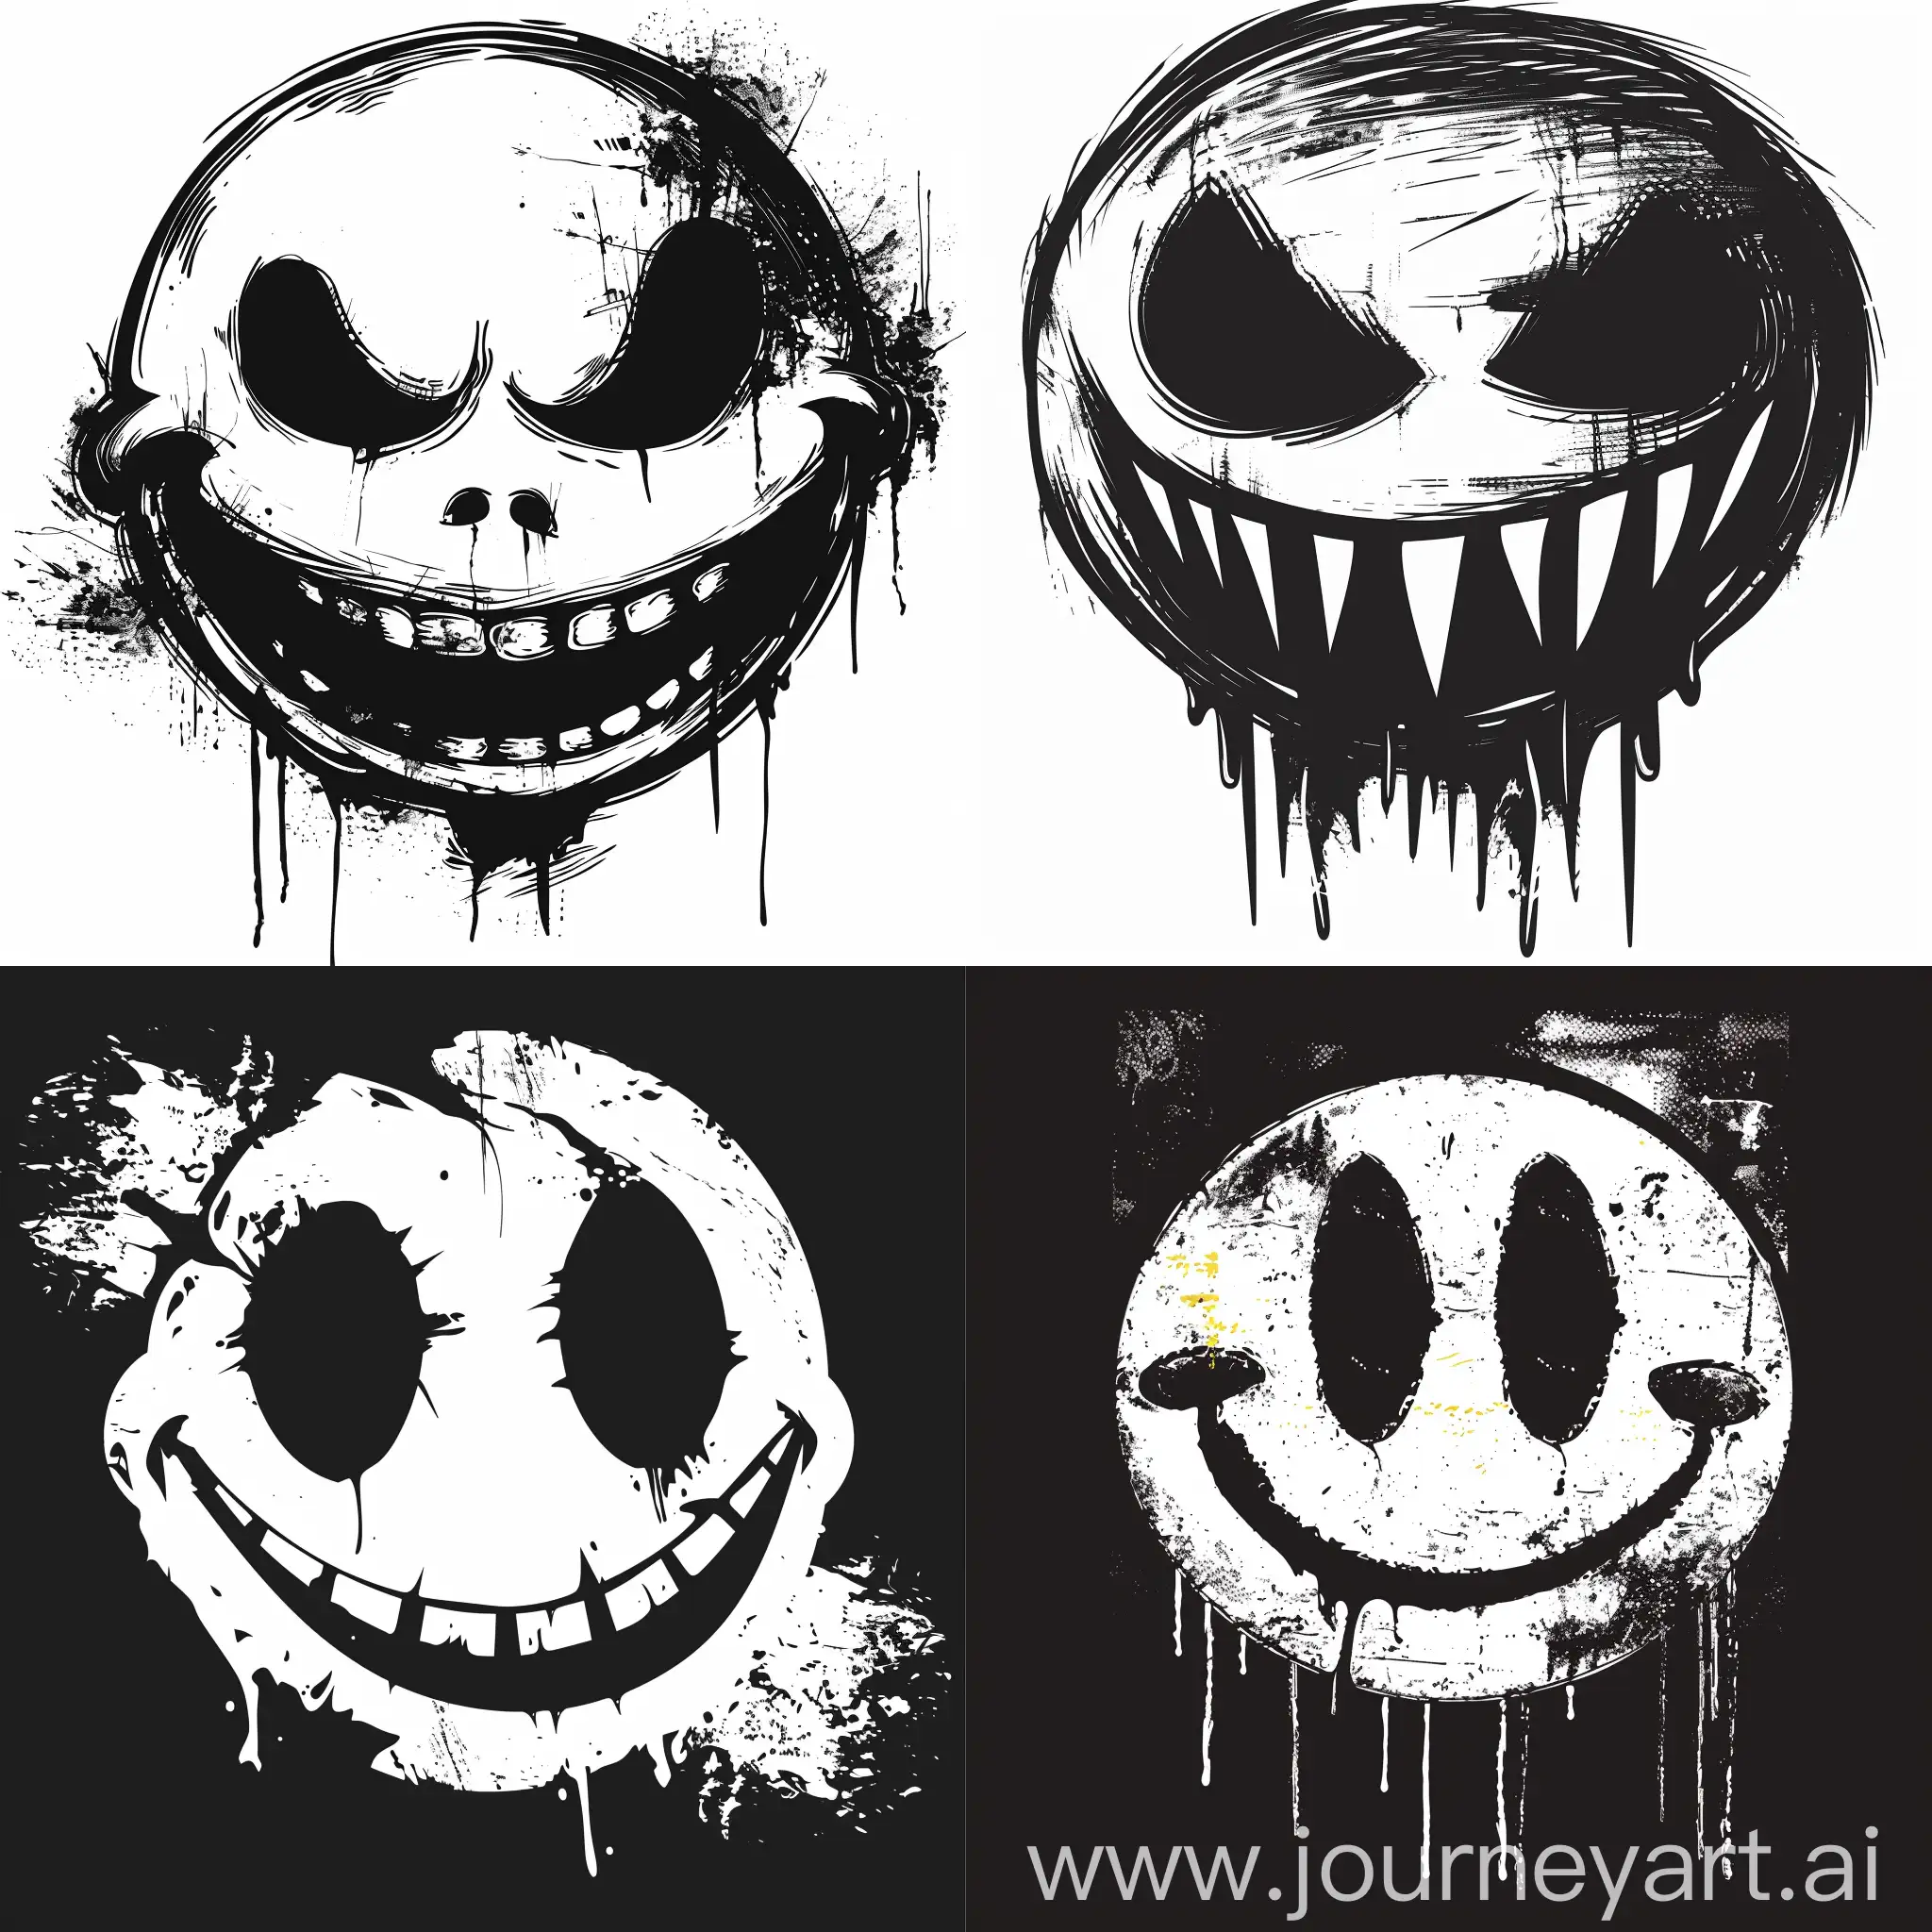 Monochromatic-Abstract-Smiley-Art-with-Distorted-Elements